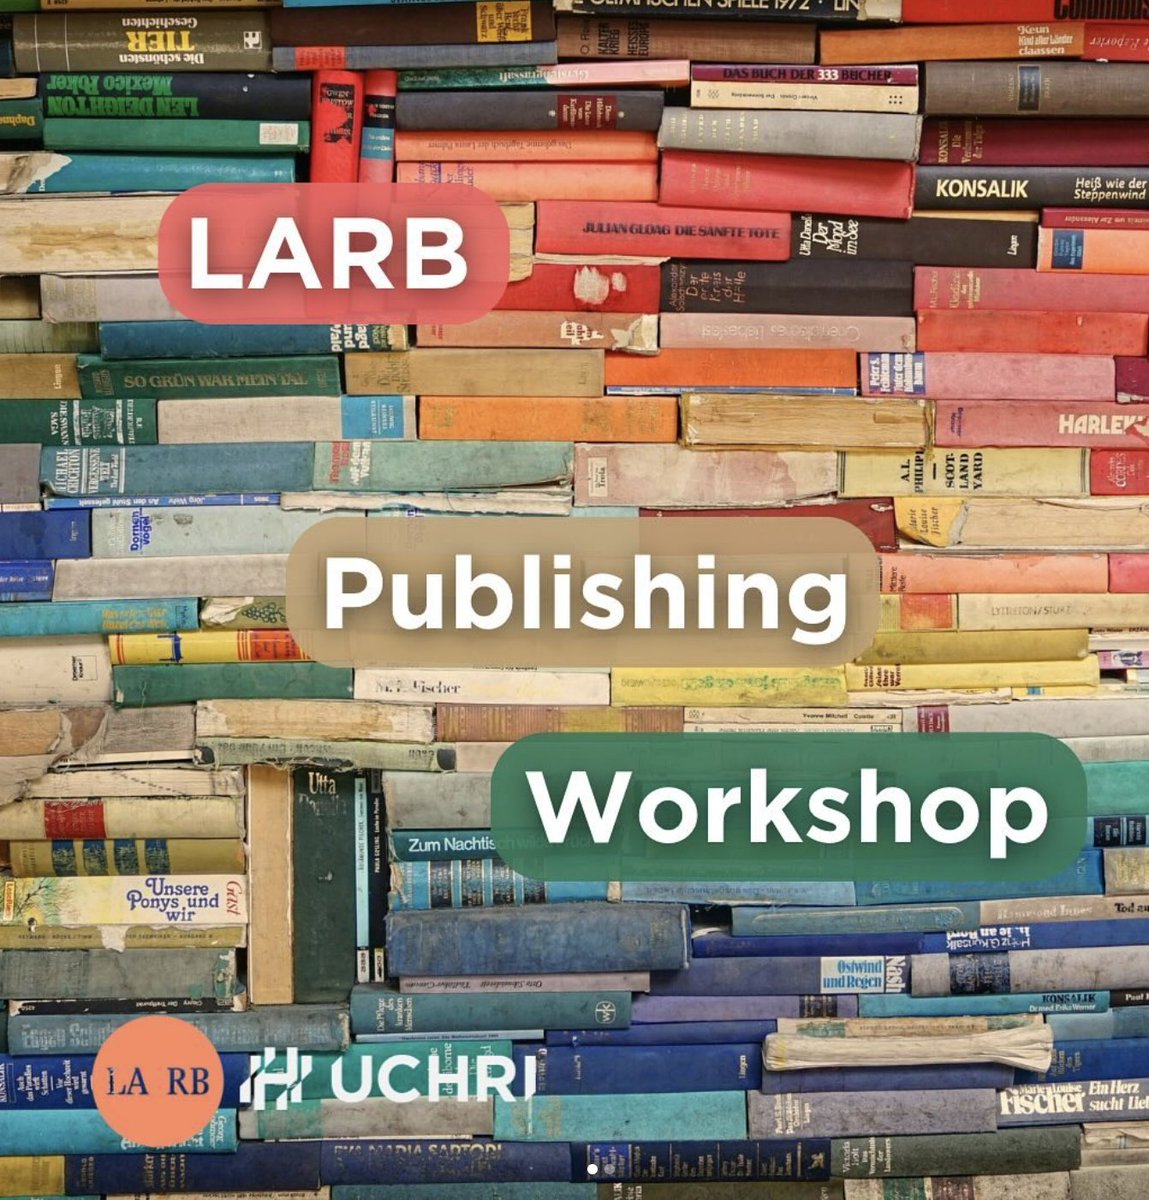 Graduate students interested in pursuing a career in publishing, apply for this valuable summer opportunity with the LA Review of Books! UCHRI will cover the $3,000 tuition for two UC PhD students in the humanities. Check out more details here: uchri.org/news/uchri-par…